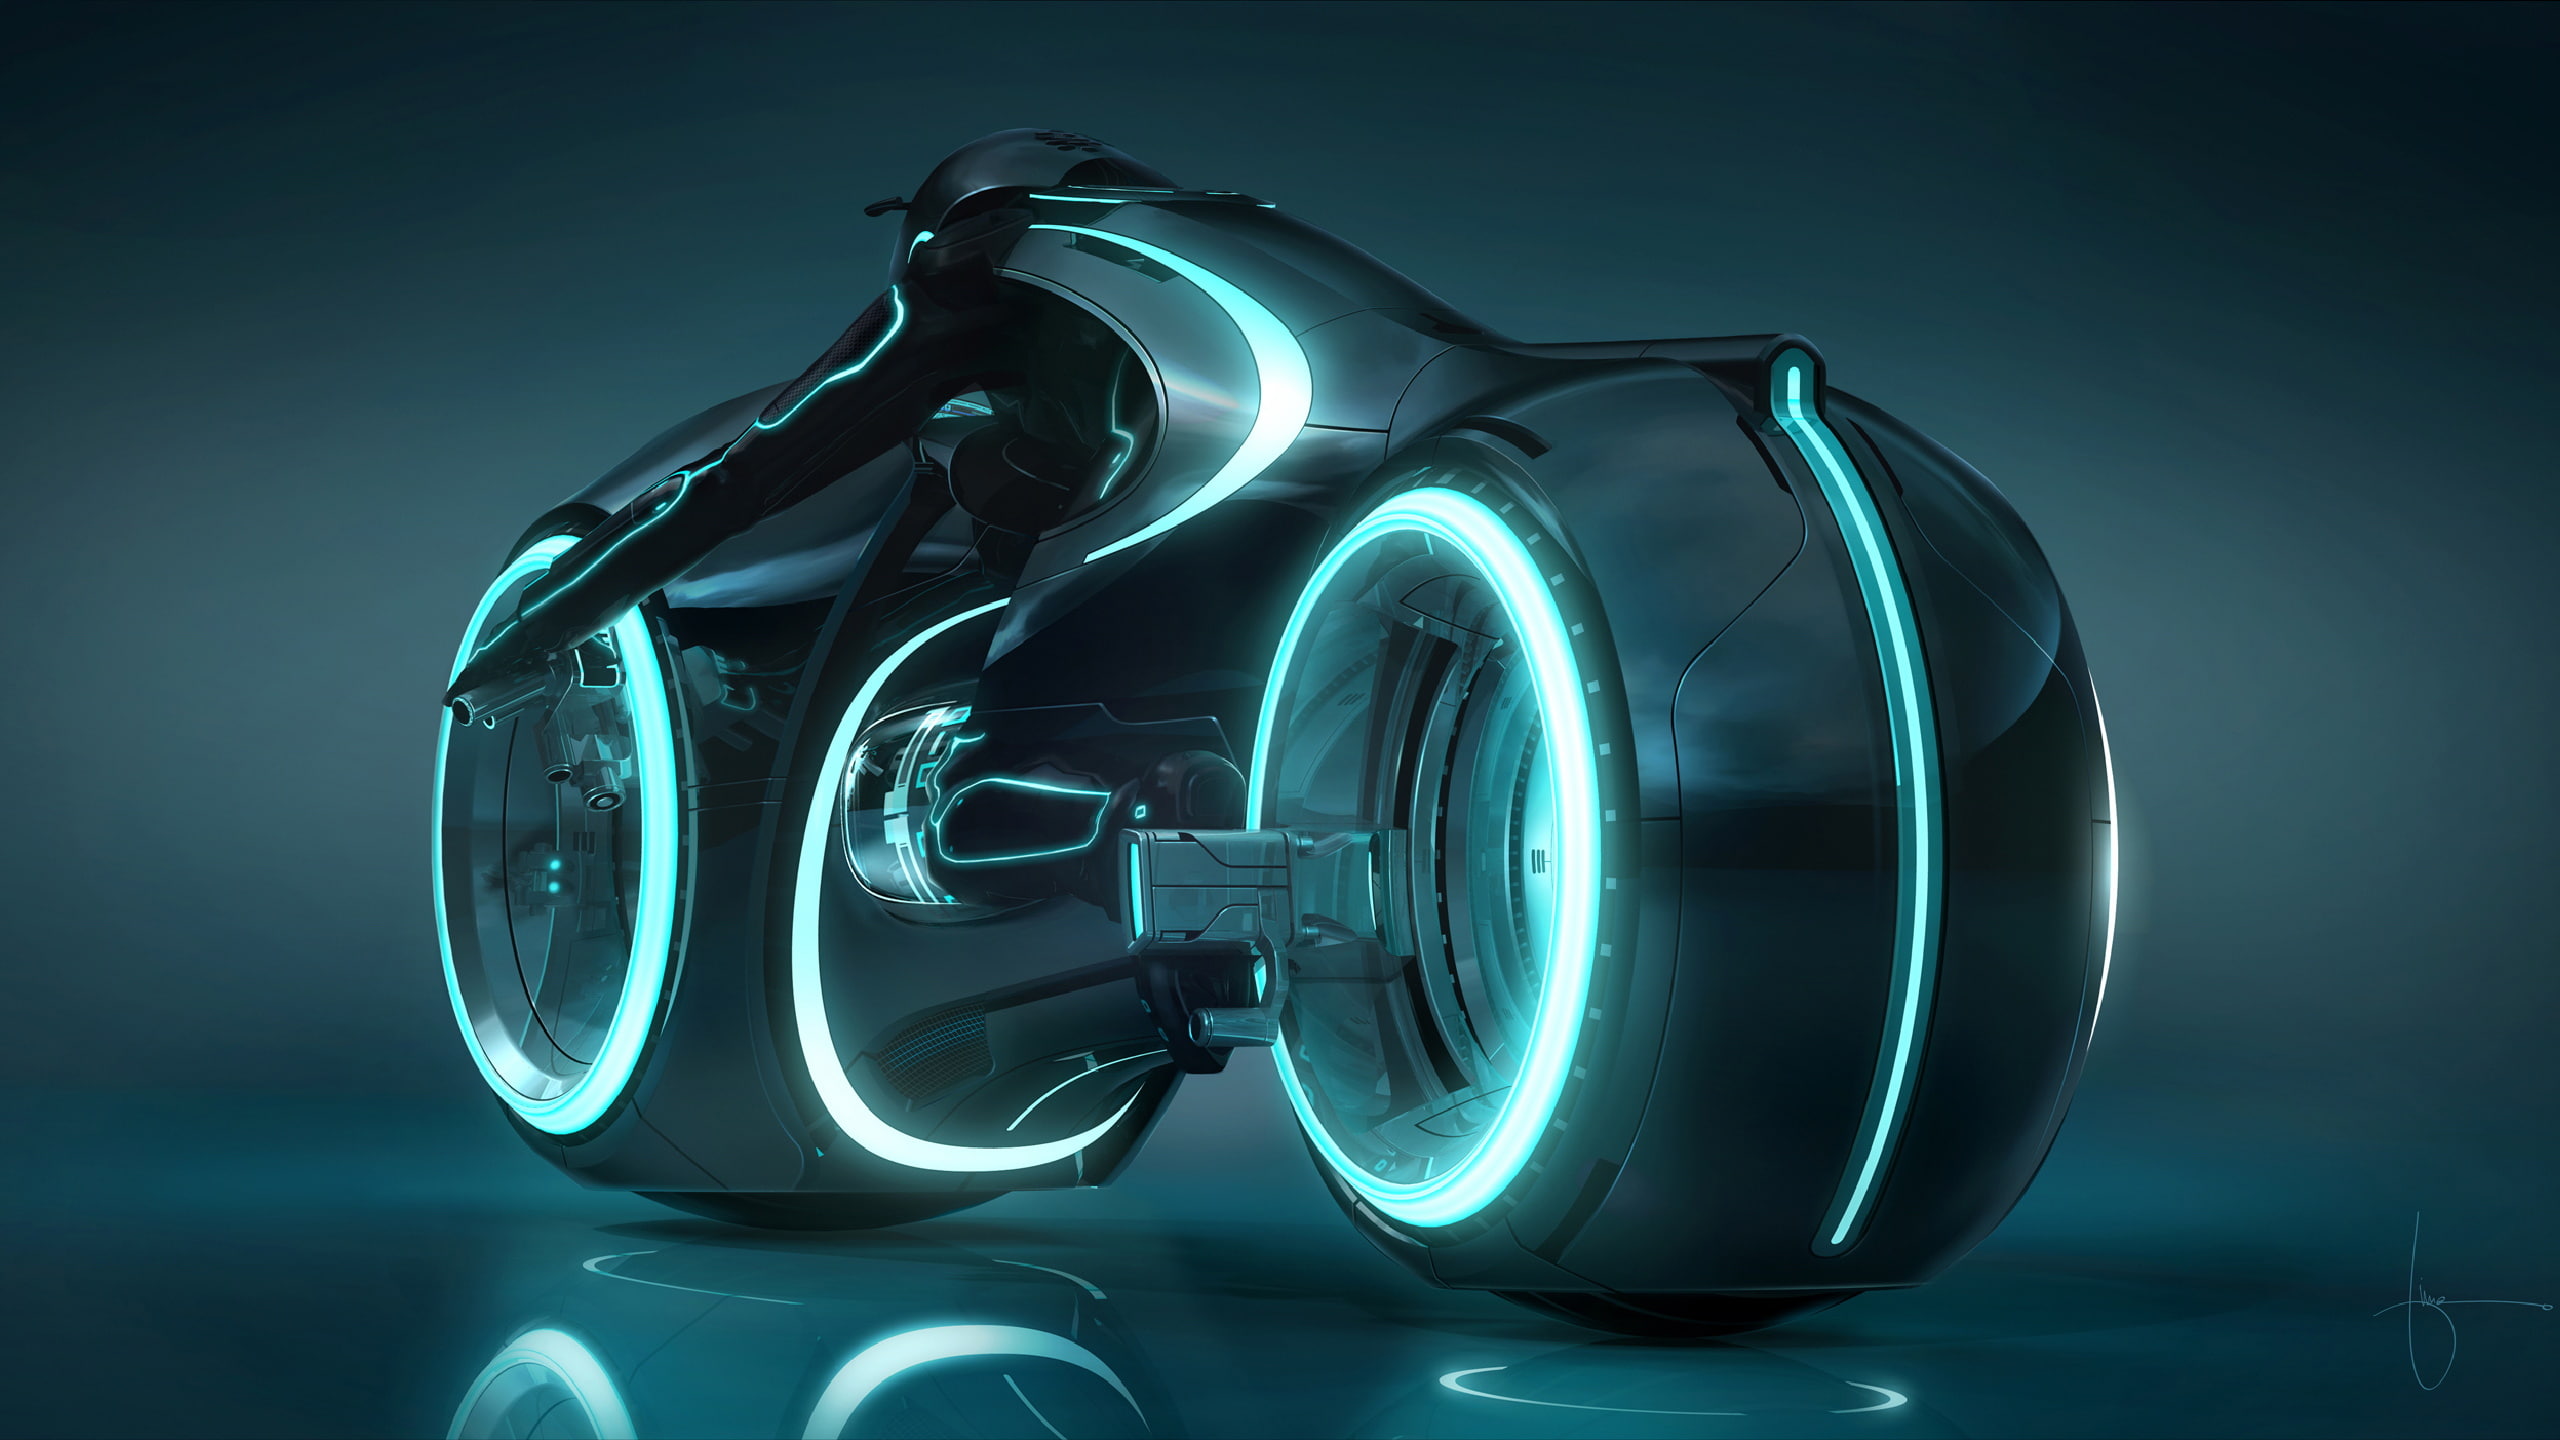 Tron Legacy, motorcycles